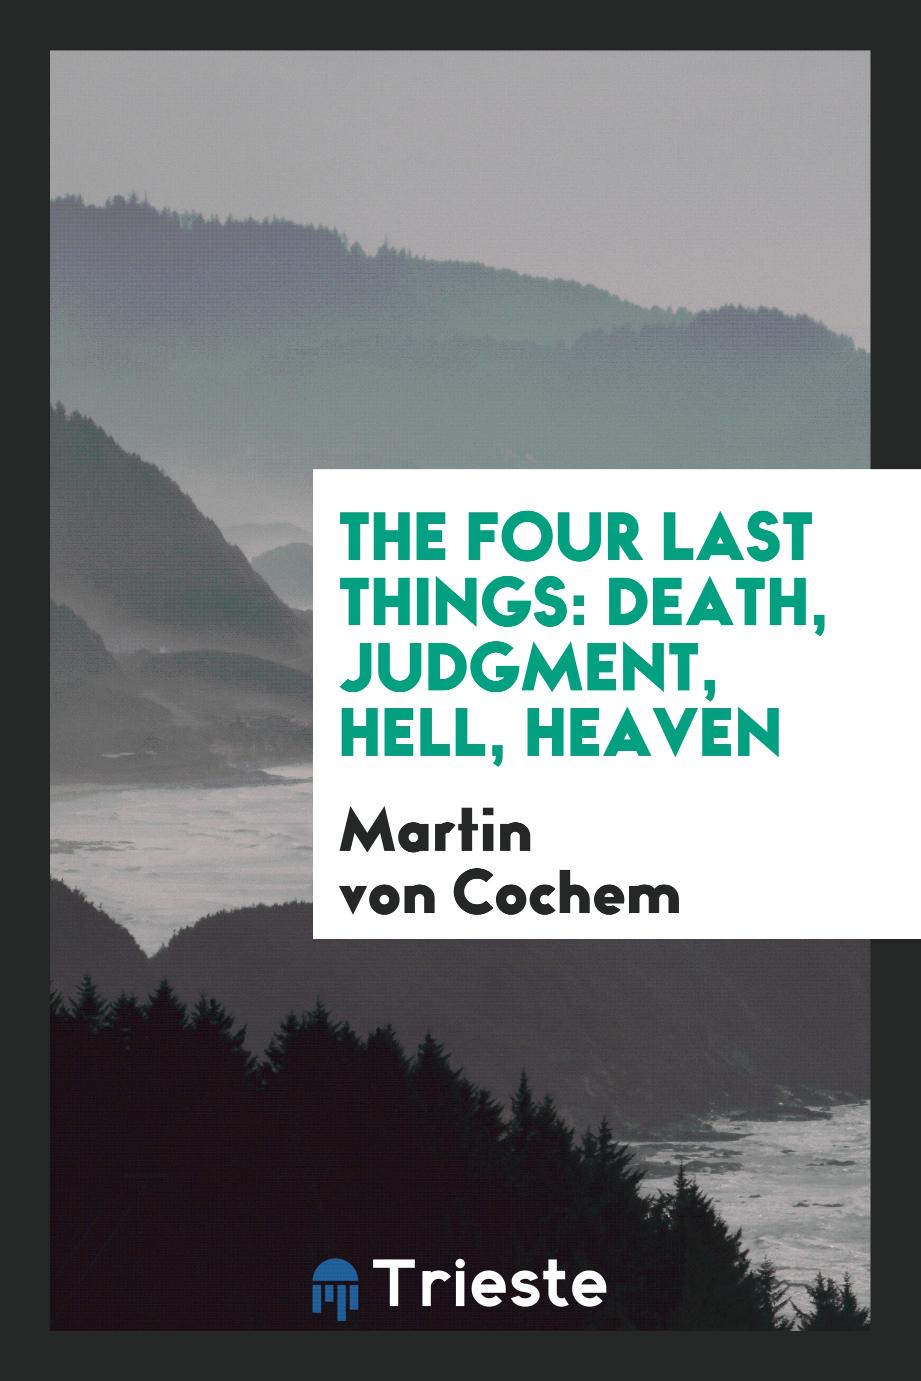 The four last things: death, judgment, hell, heaven